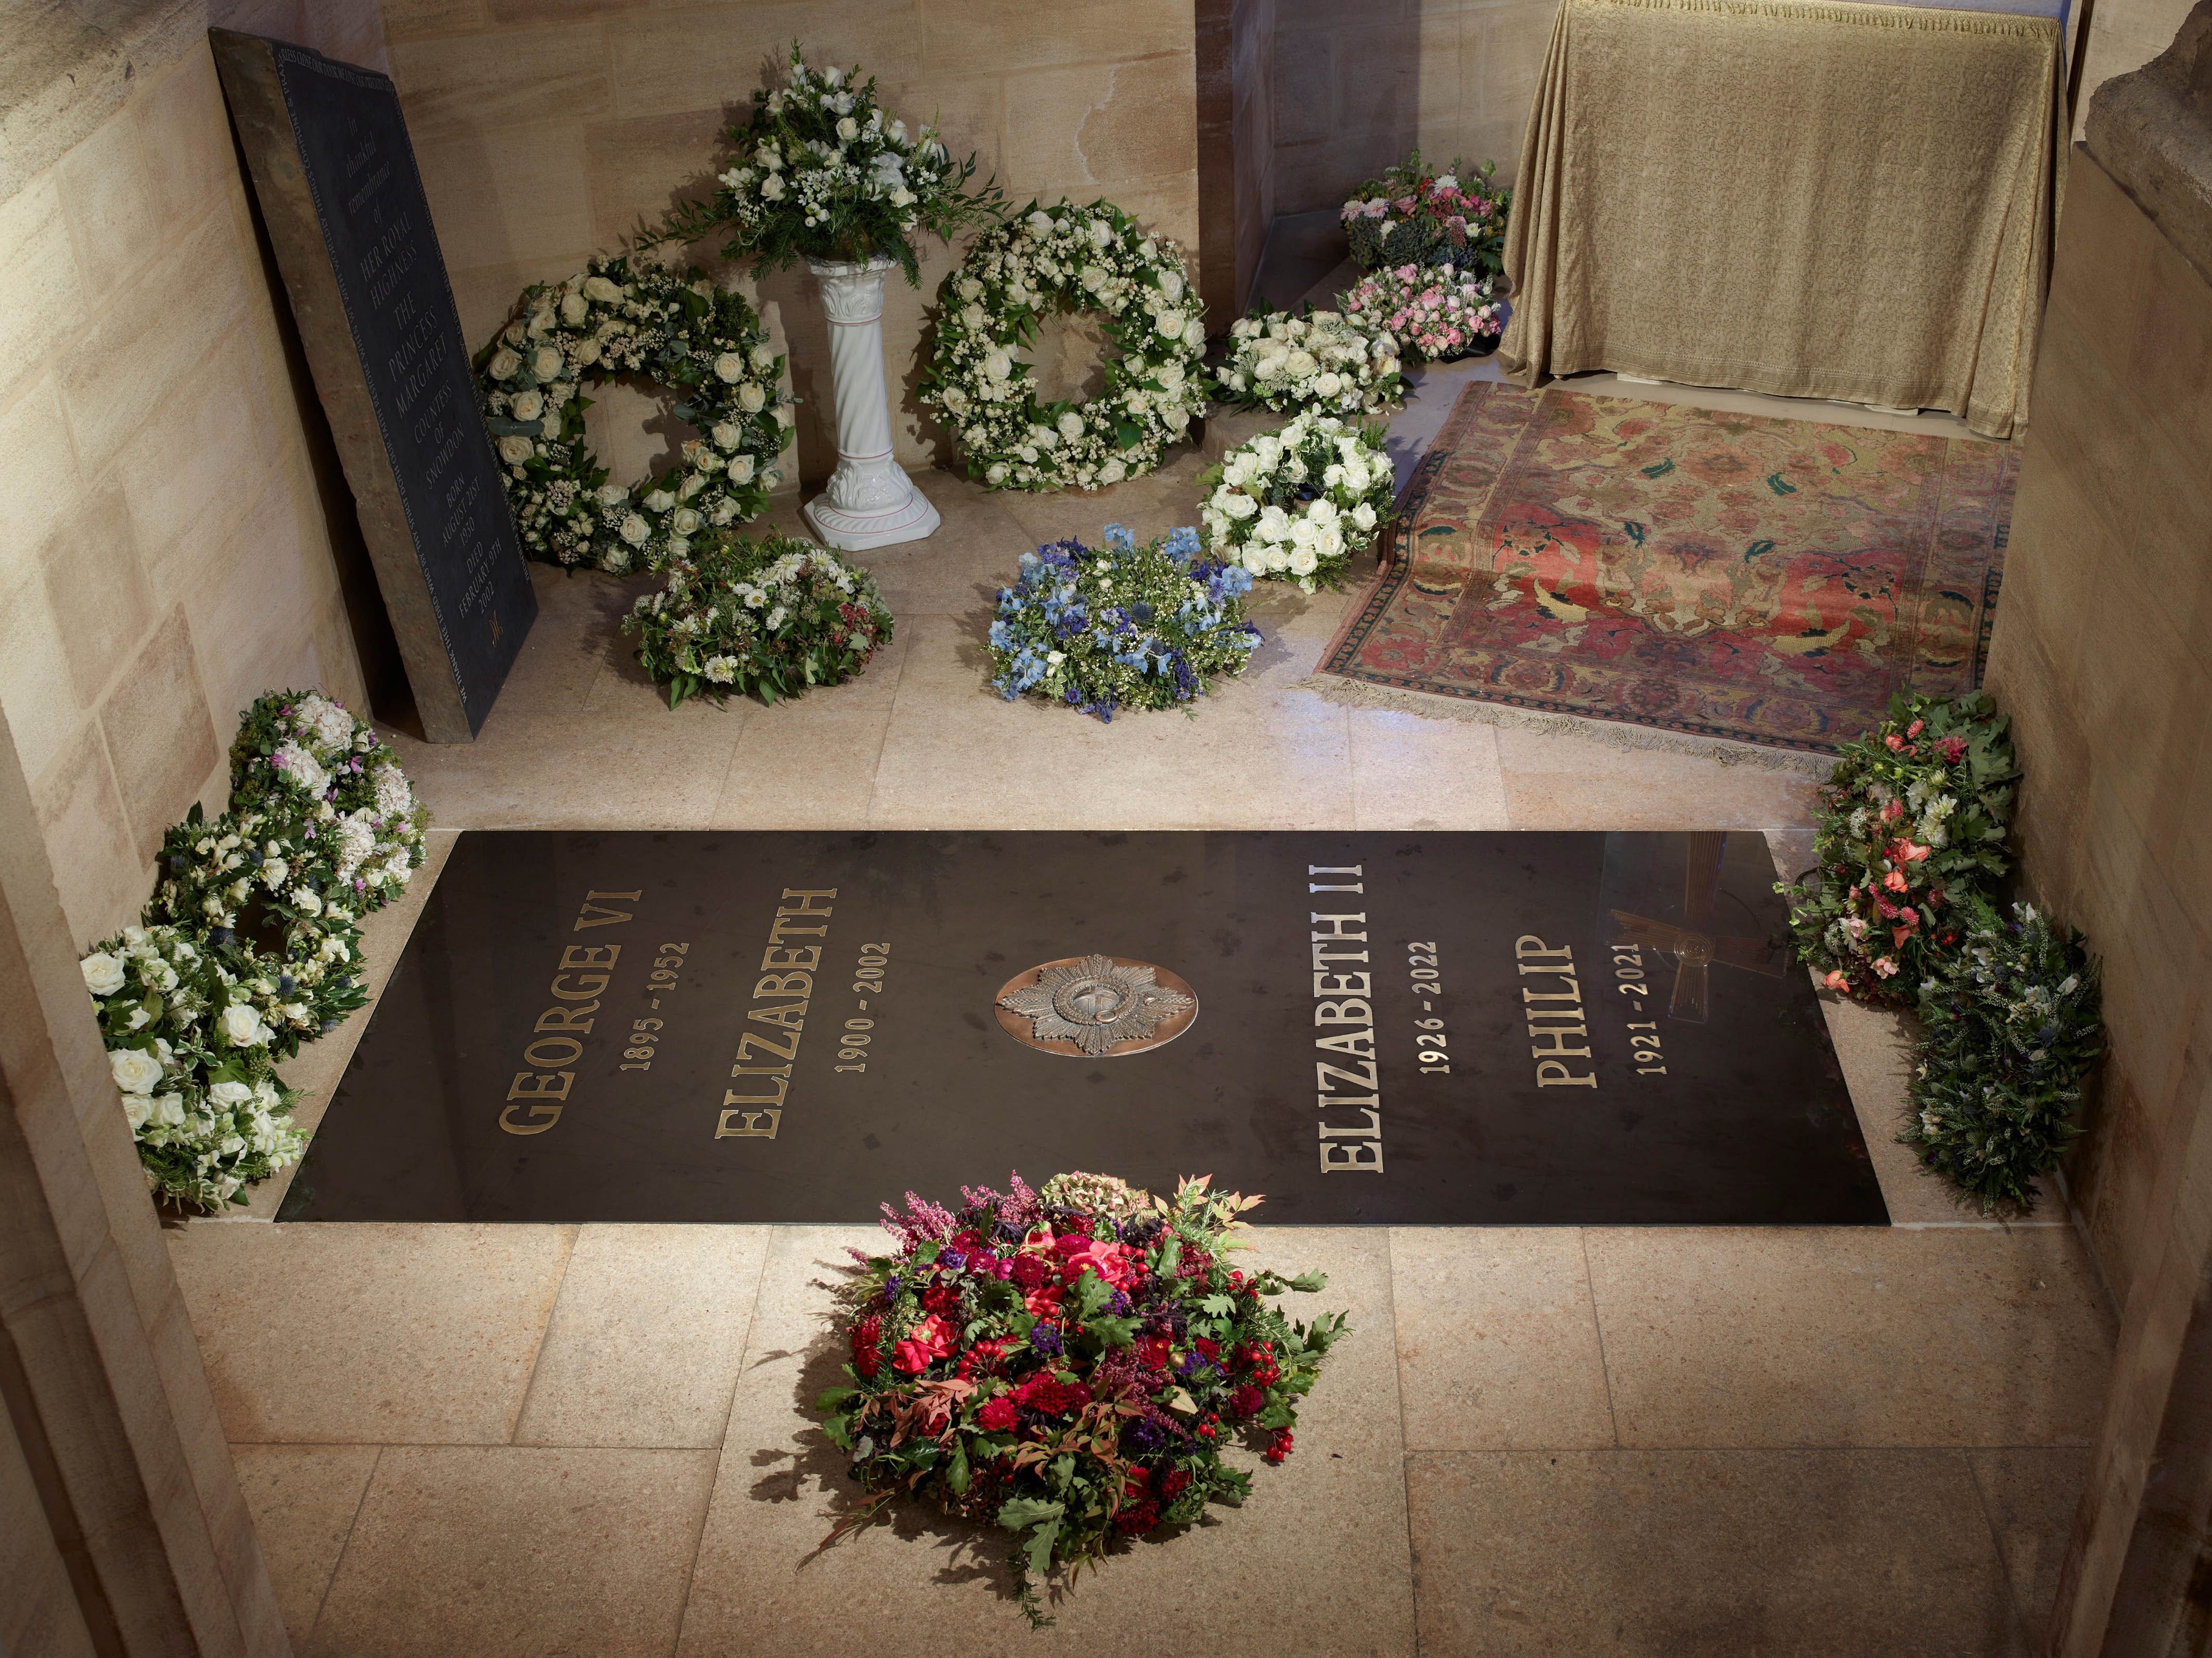 Queen Elizabeth II’s final resting place revealed in new Windsor Castle photograph